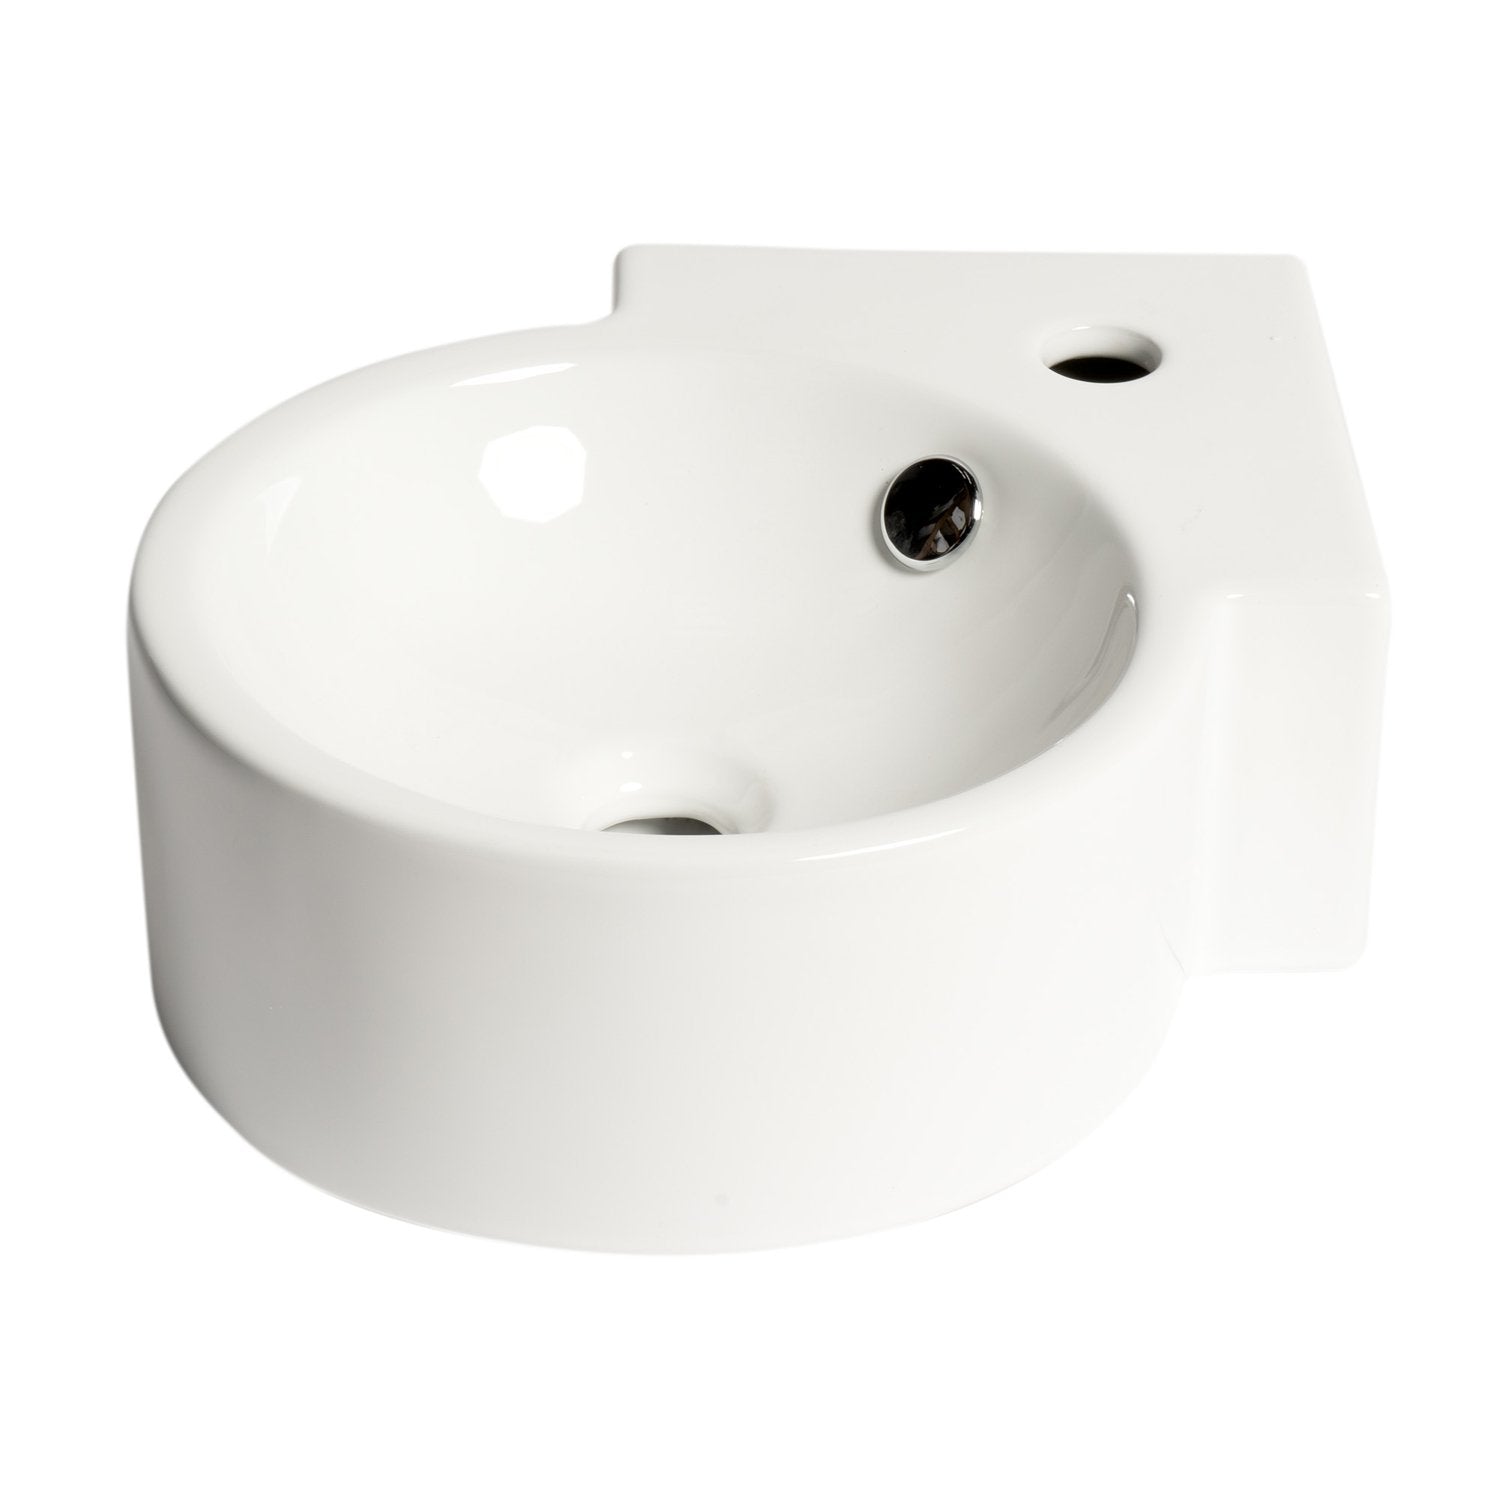 ALFI ABC121 White 17" Tiny Corner Wall Mounted Ceramic Sink with Faucet Hole